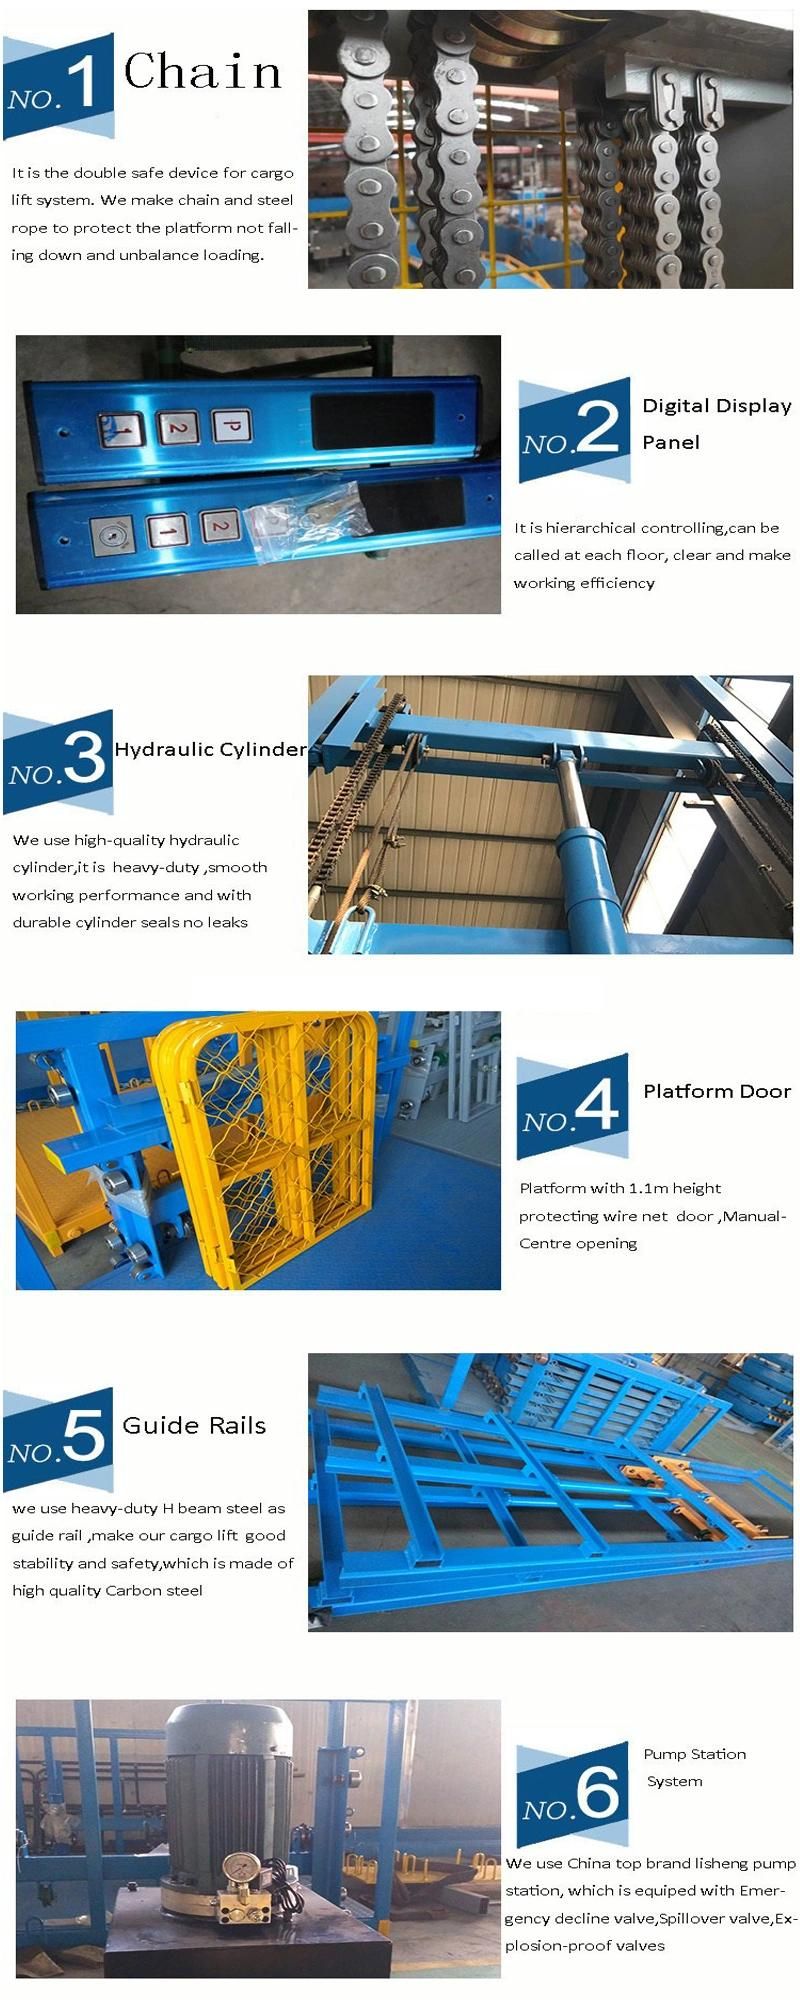 Warehouse Guide Rail Cargo Lift Platform Freight Elevator Price for Sale